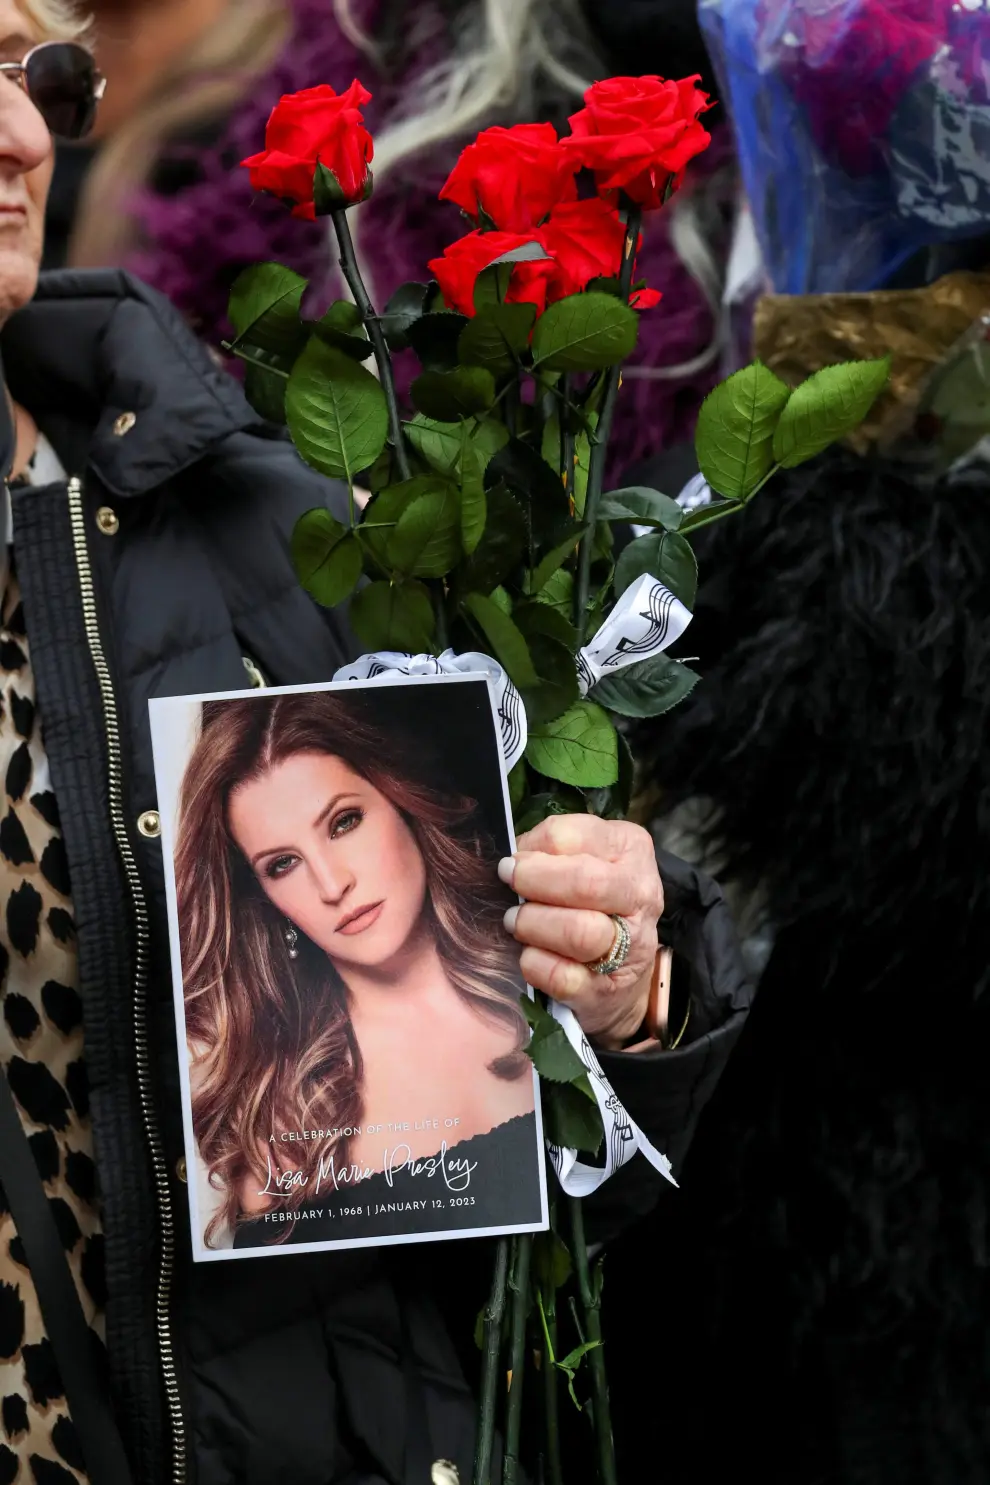 Music fans attend a public memorial for singer Lisa Marie Presley, the only daughter of the "King of Rock 'n' Roll," Elvis Presley, at Graceland Mansion in Memphis, Tennessee, U.S. January 22, 2023.  REUTERS/Nikki Boertman PEOPLE-LISA MARIE PRESLEY/